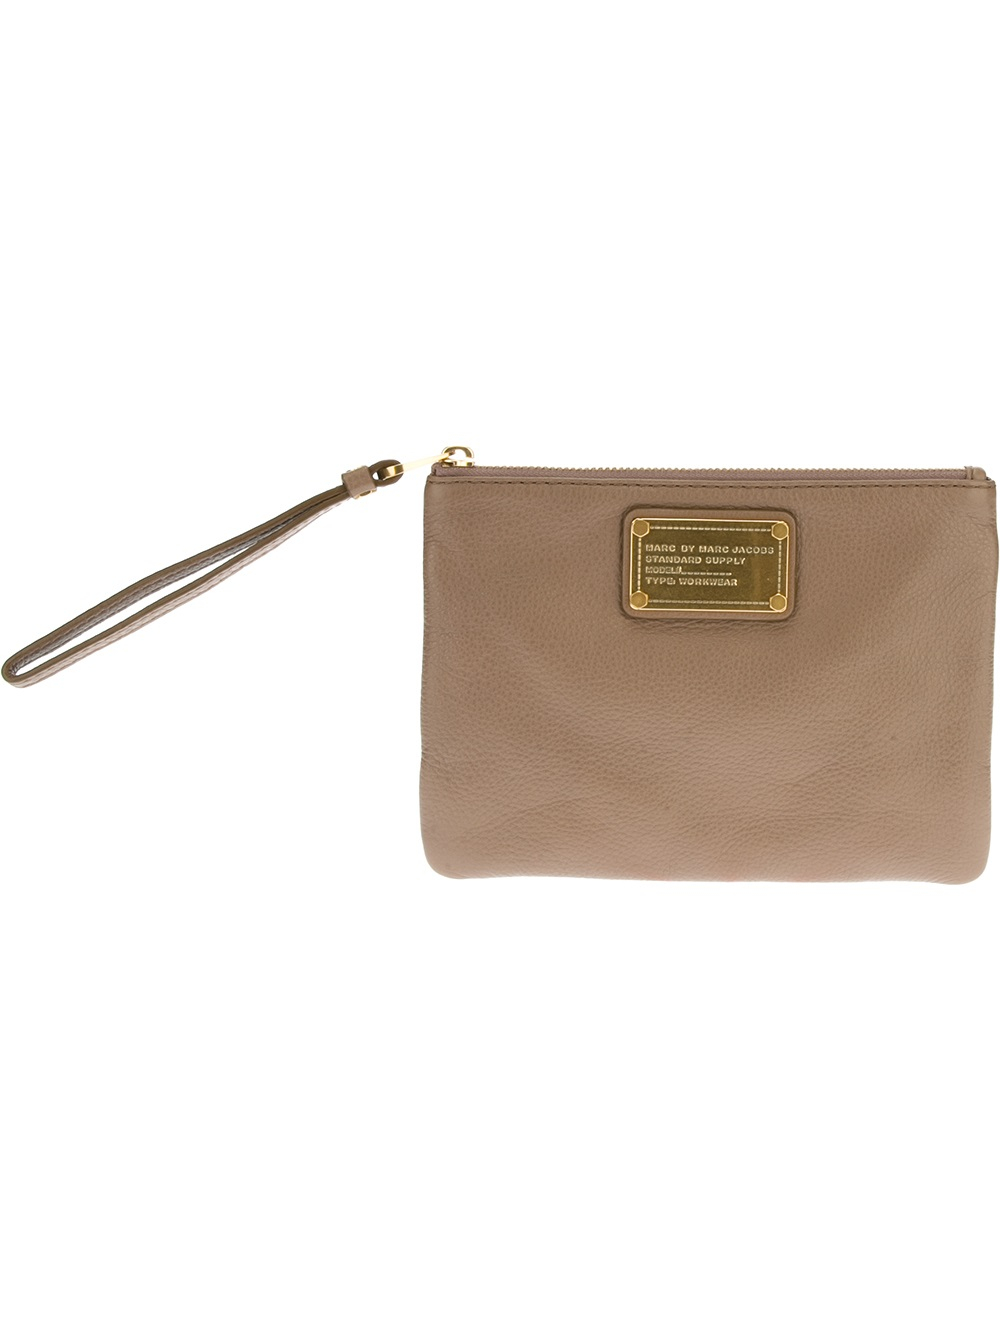 Marc By Marc Jacobs Mini Clutch in Natural | Lyst